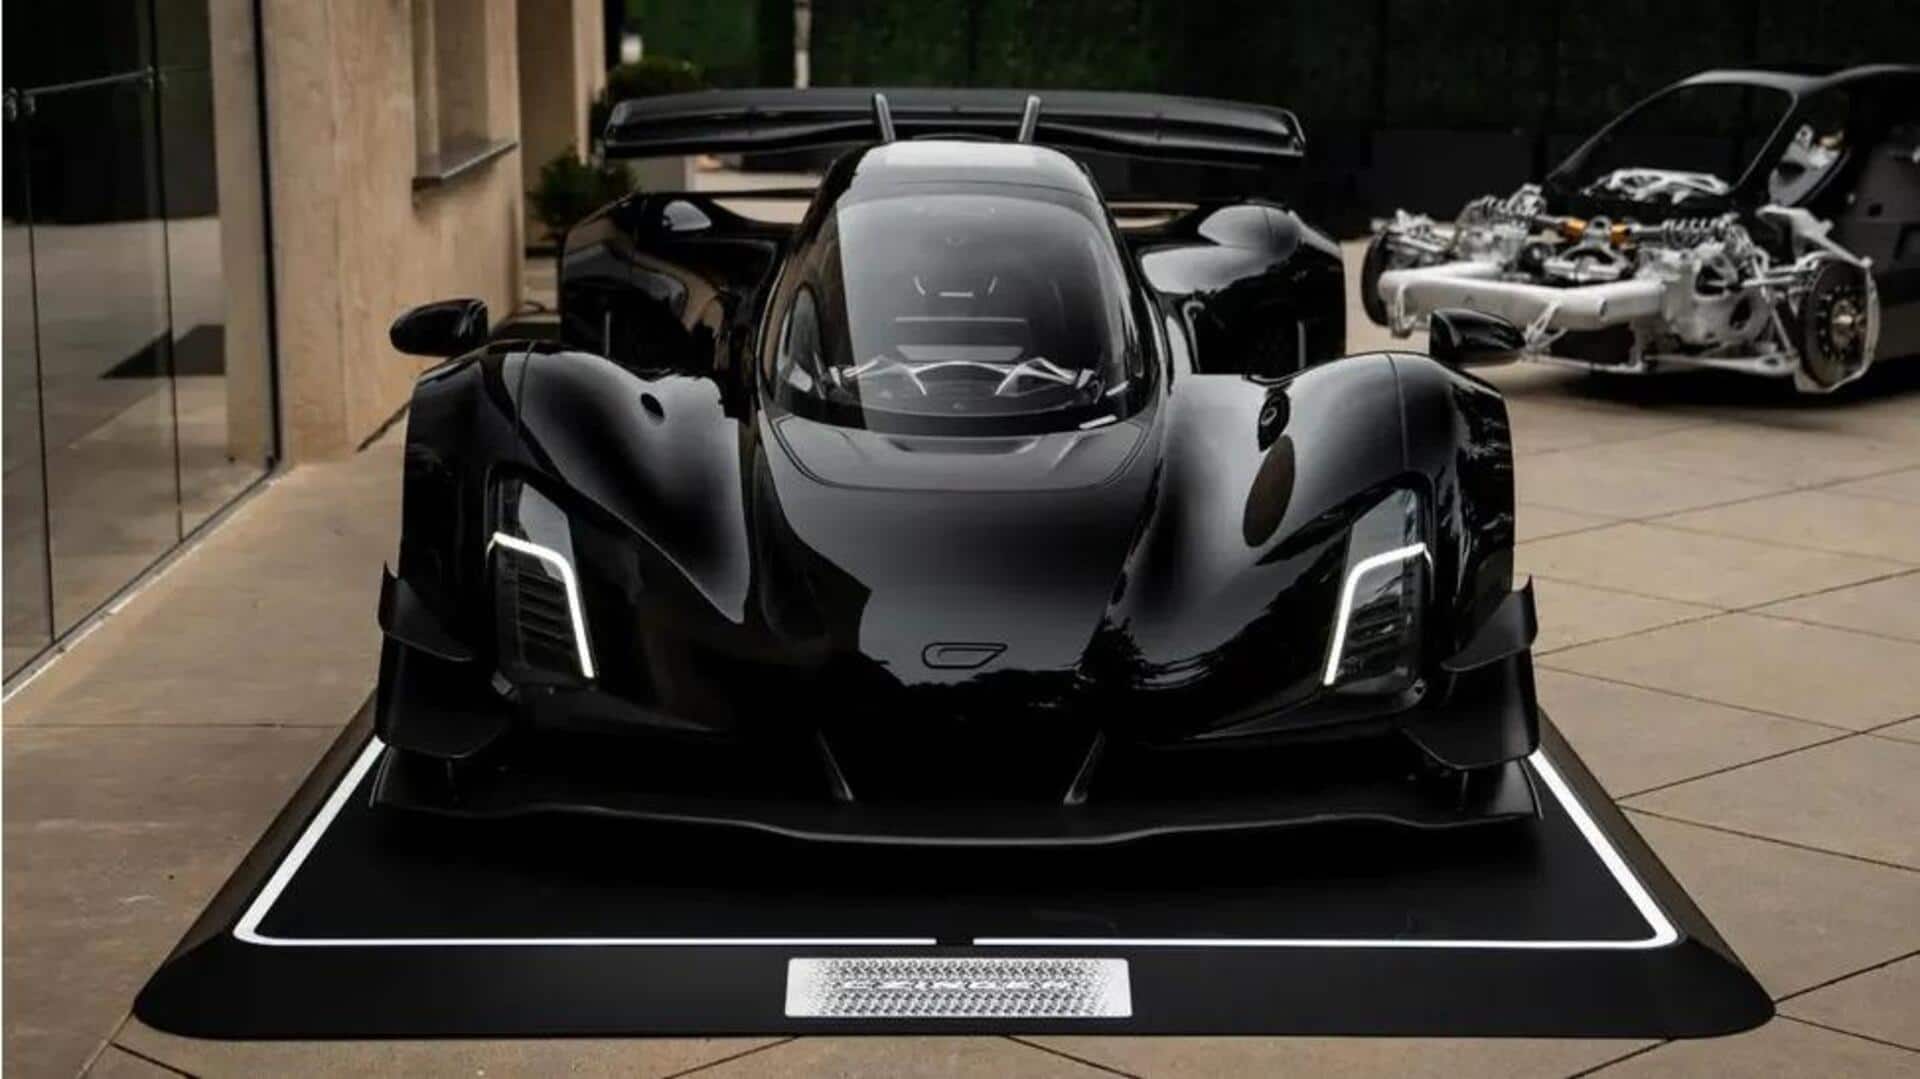 Czinger pays tribute to SR-71 Blackbird with one-off 21C hypercar